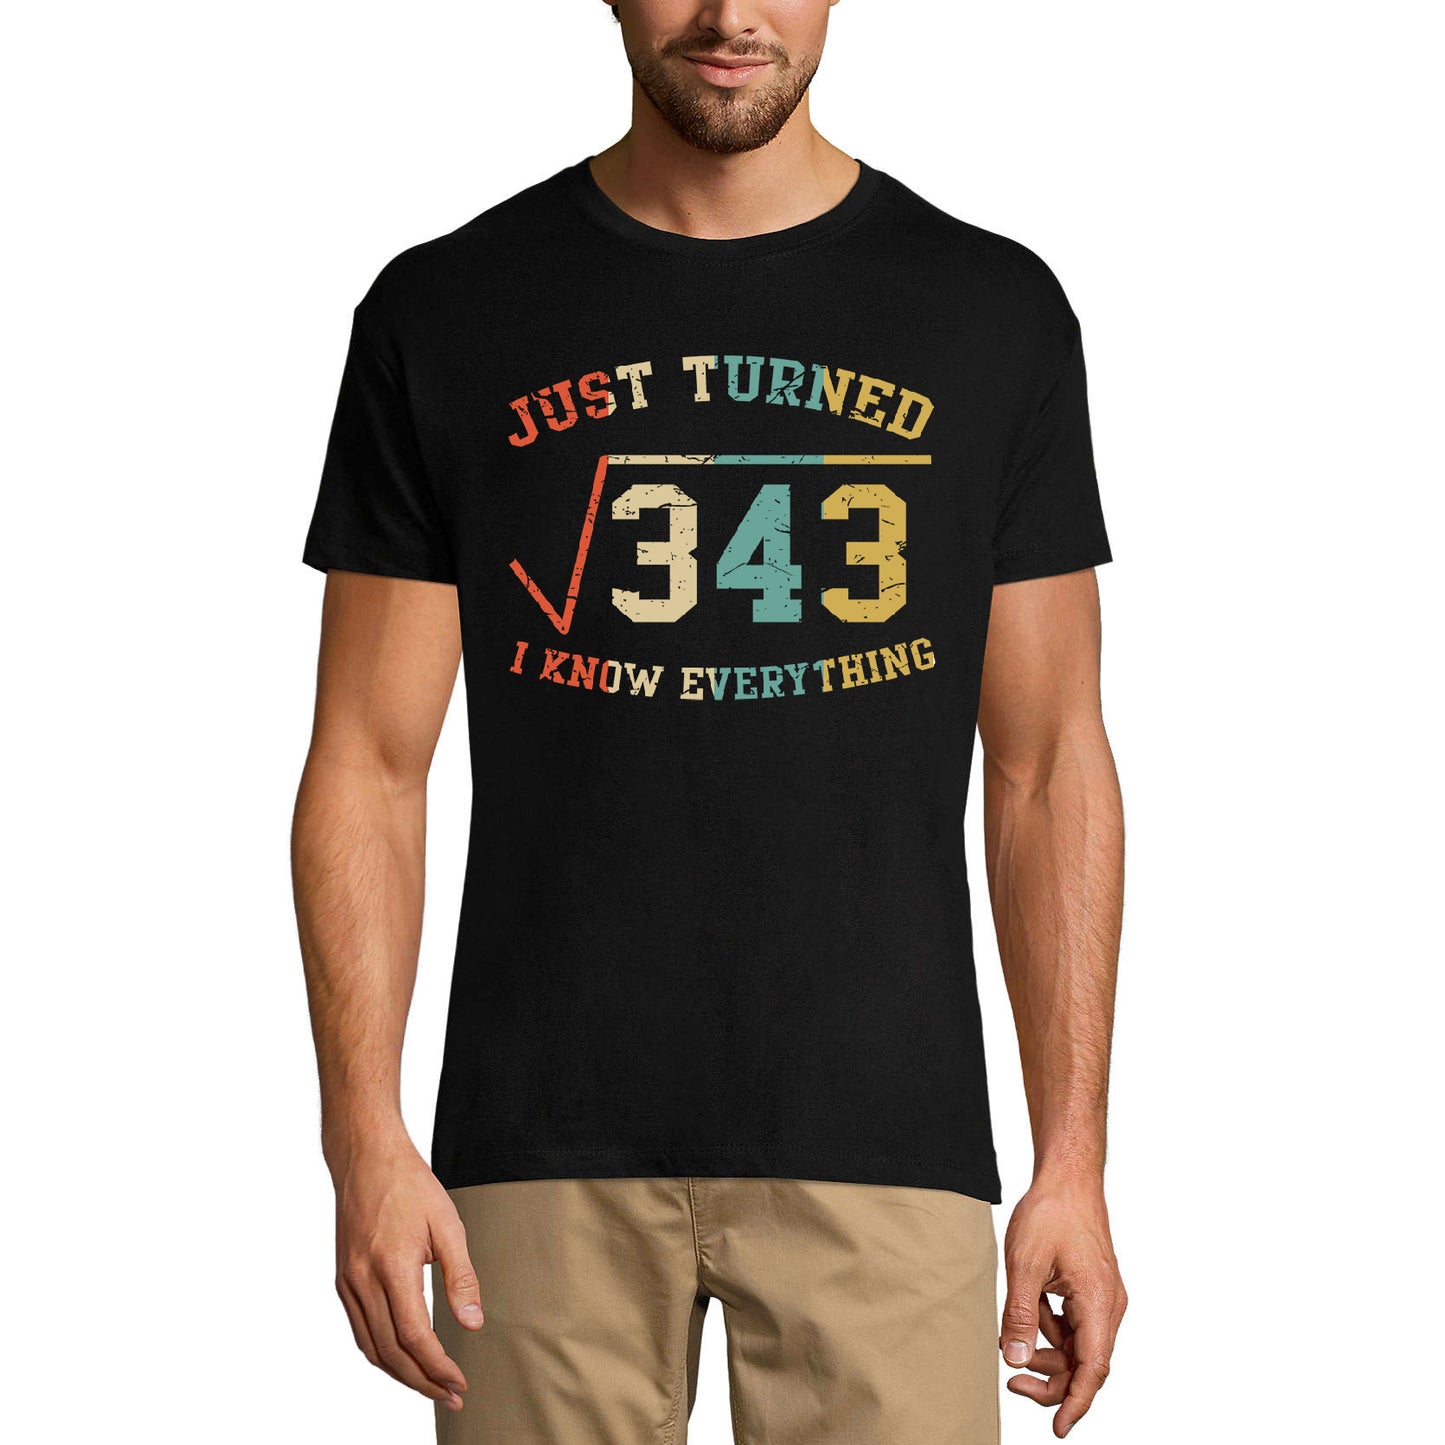 ULTRABASIC Men's Math T-Shirt Just Turned 18 I Know Everything - Funny Birthday Tee Shirt for Mathematician